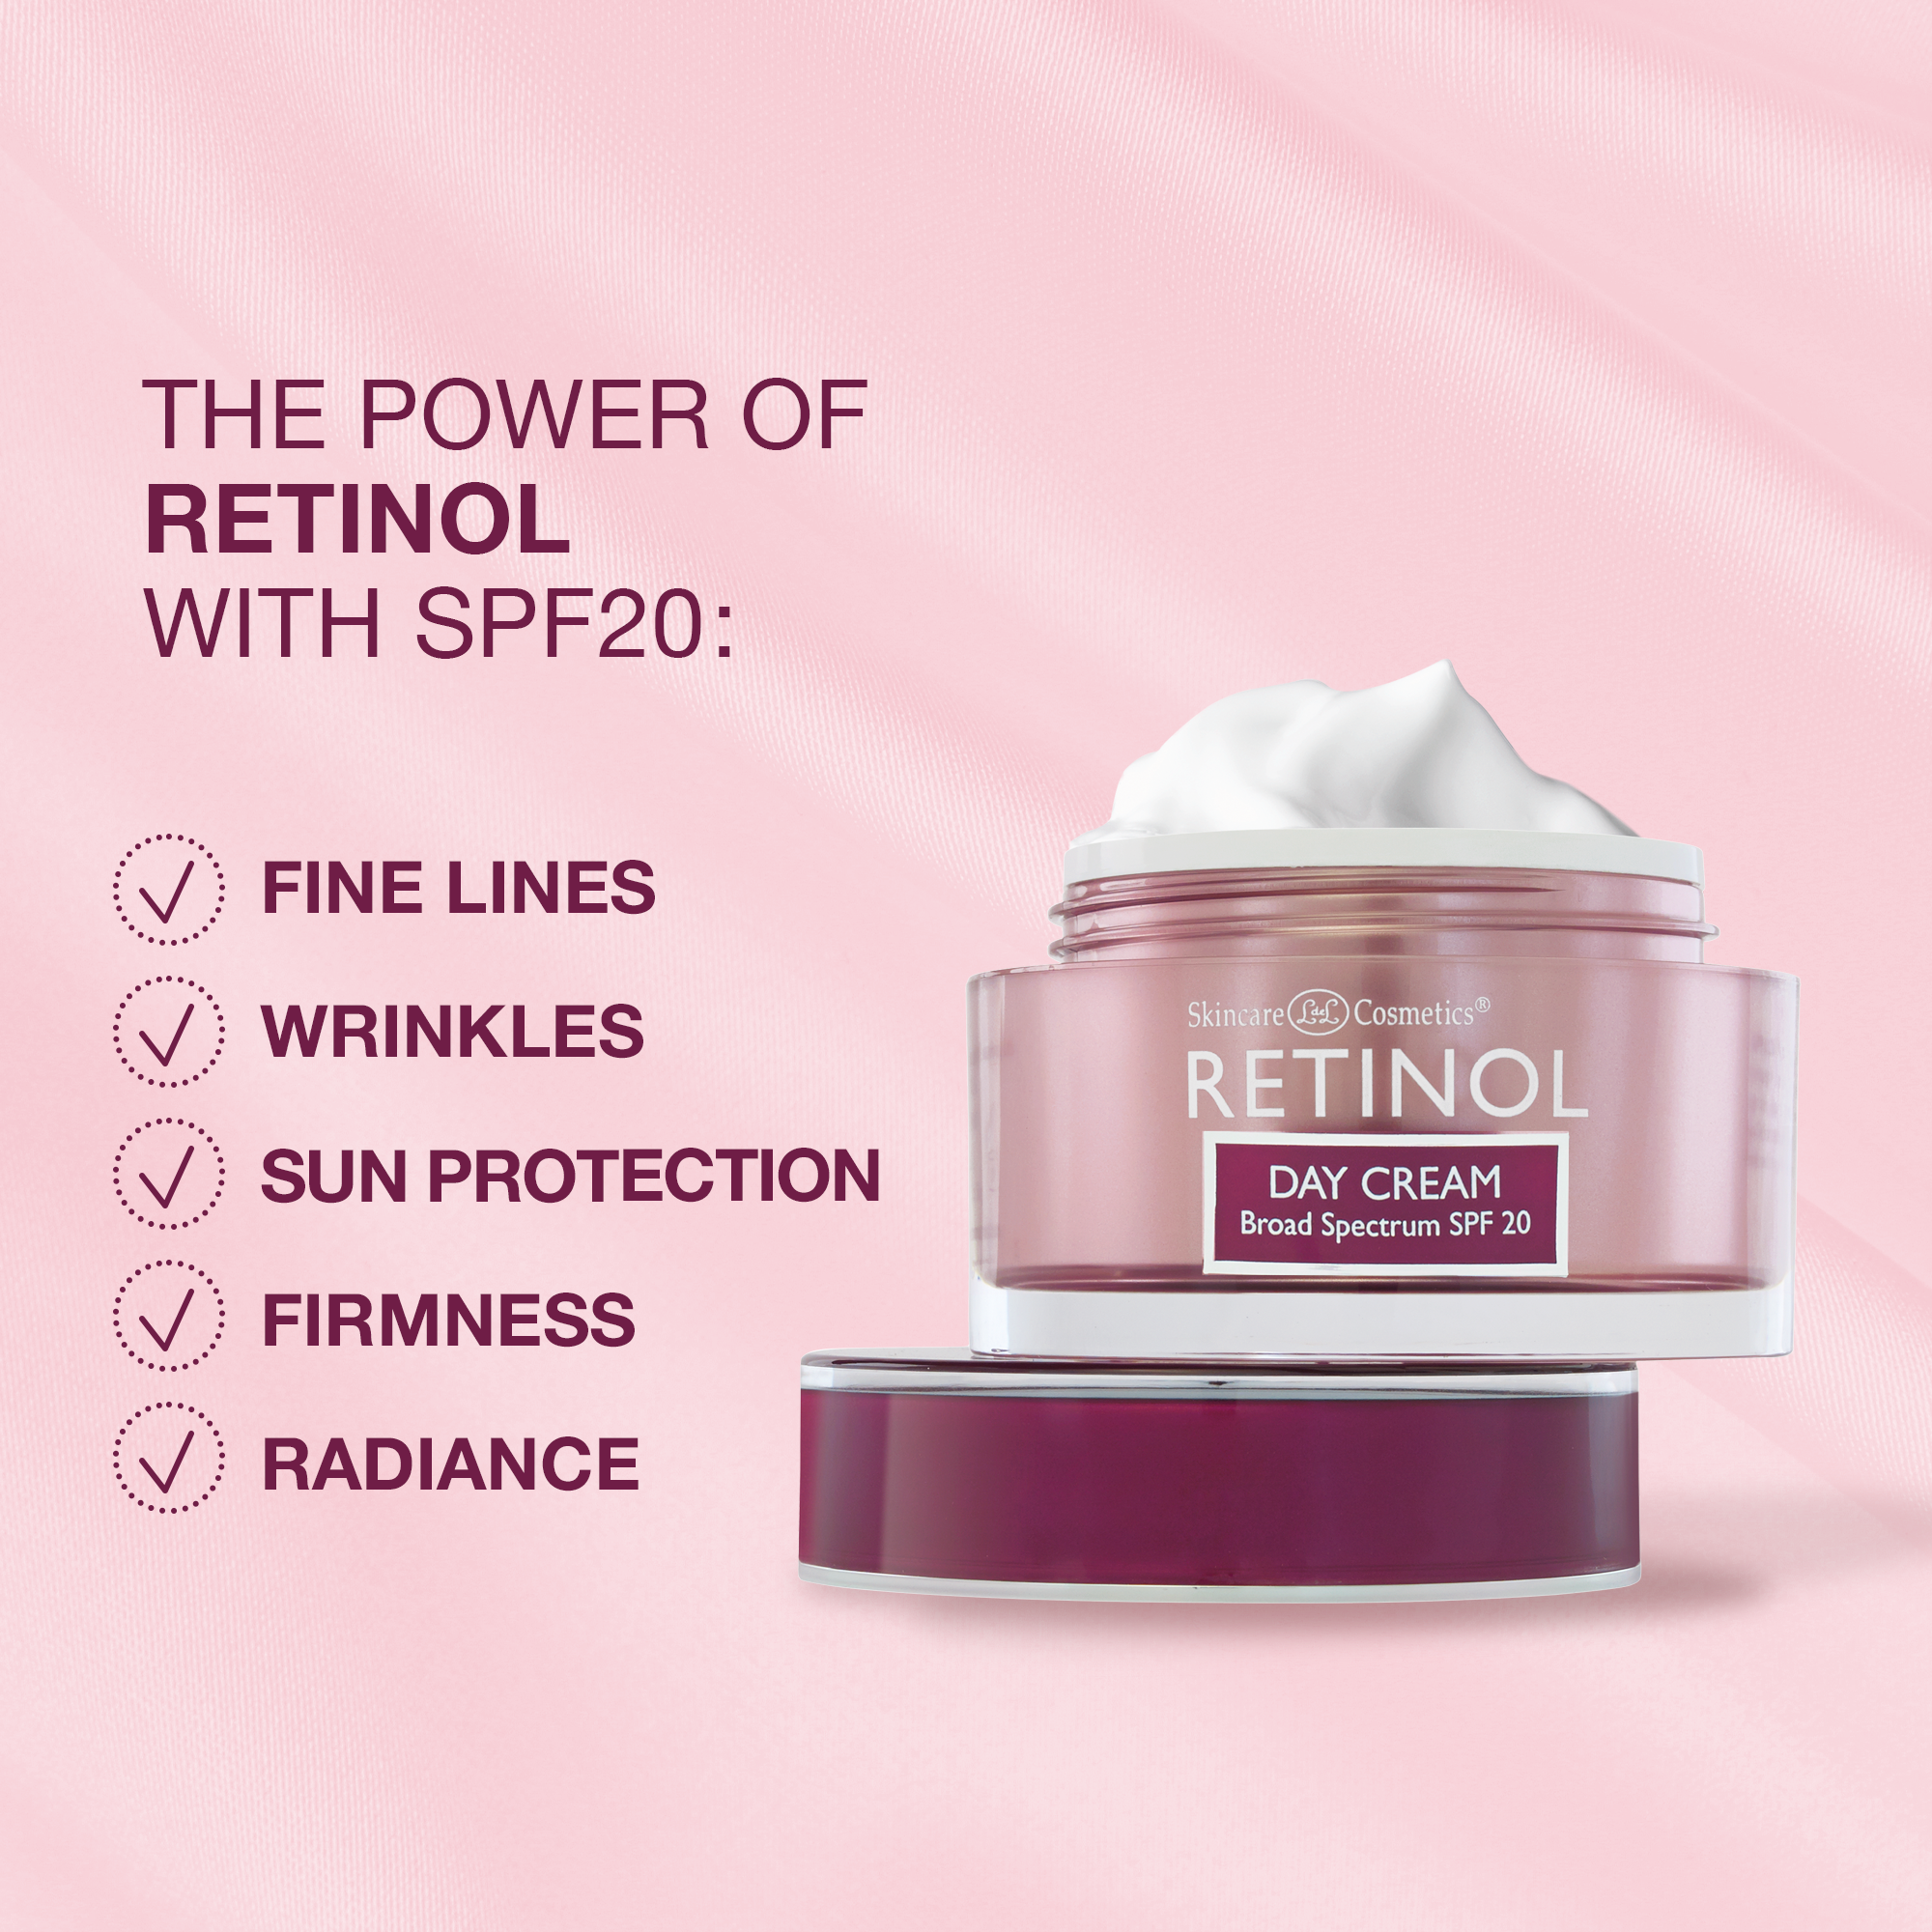 Luxurious Day Cream with Broad Spectrum SPF 20